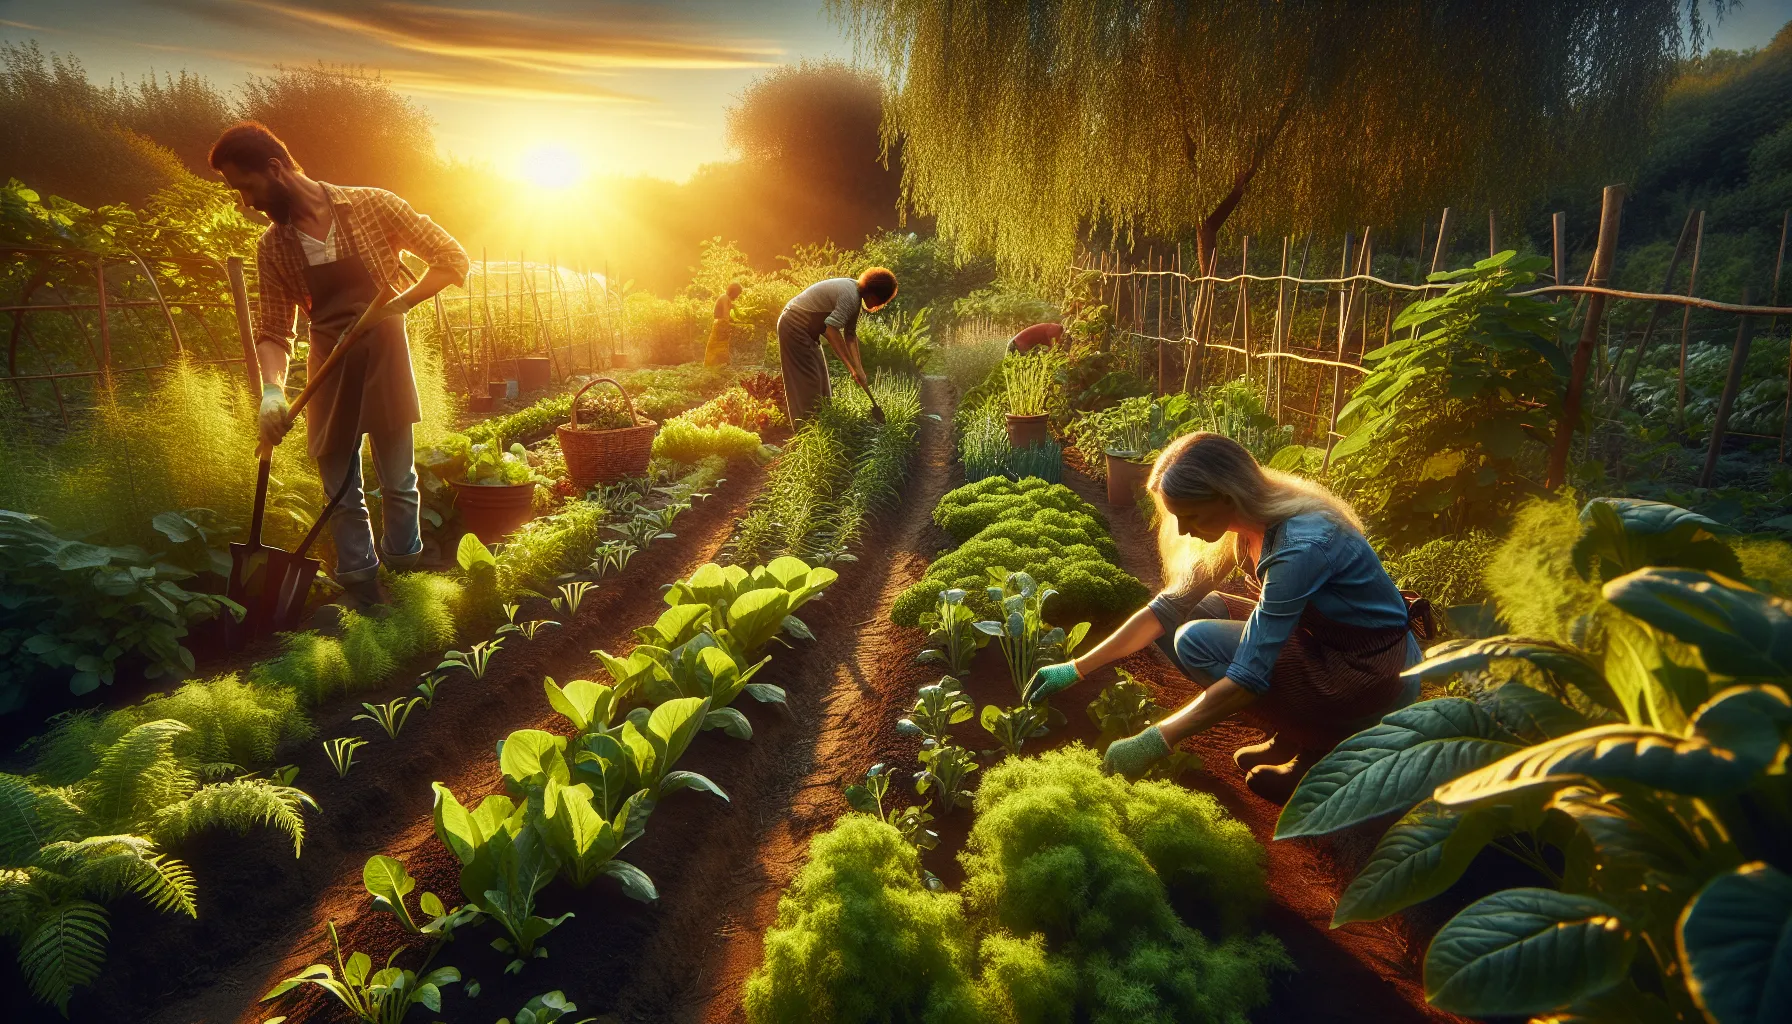 Three people tend to their vegetable garden bathed in the warm glow of the setting sun.